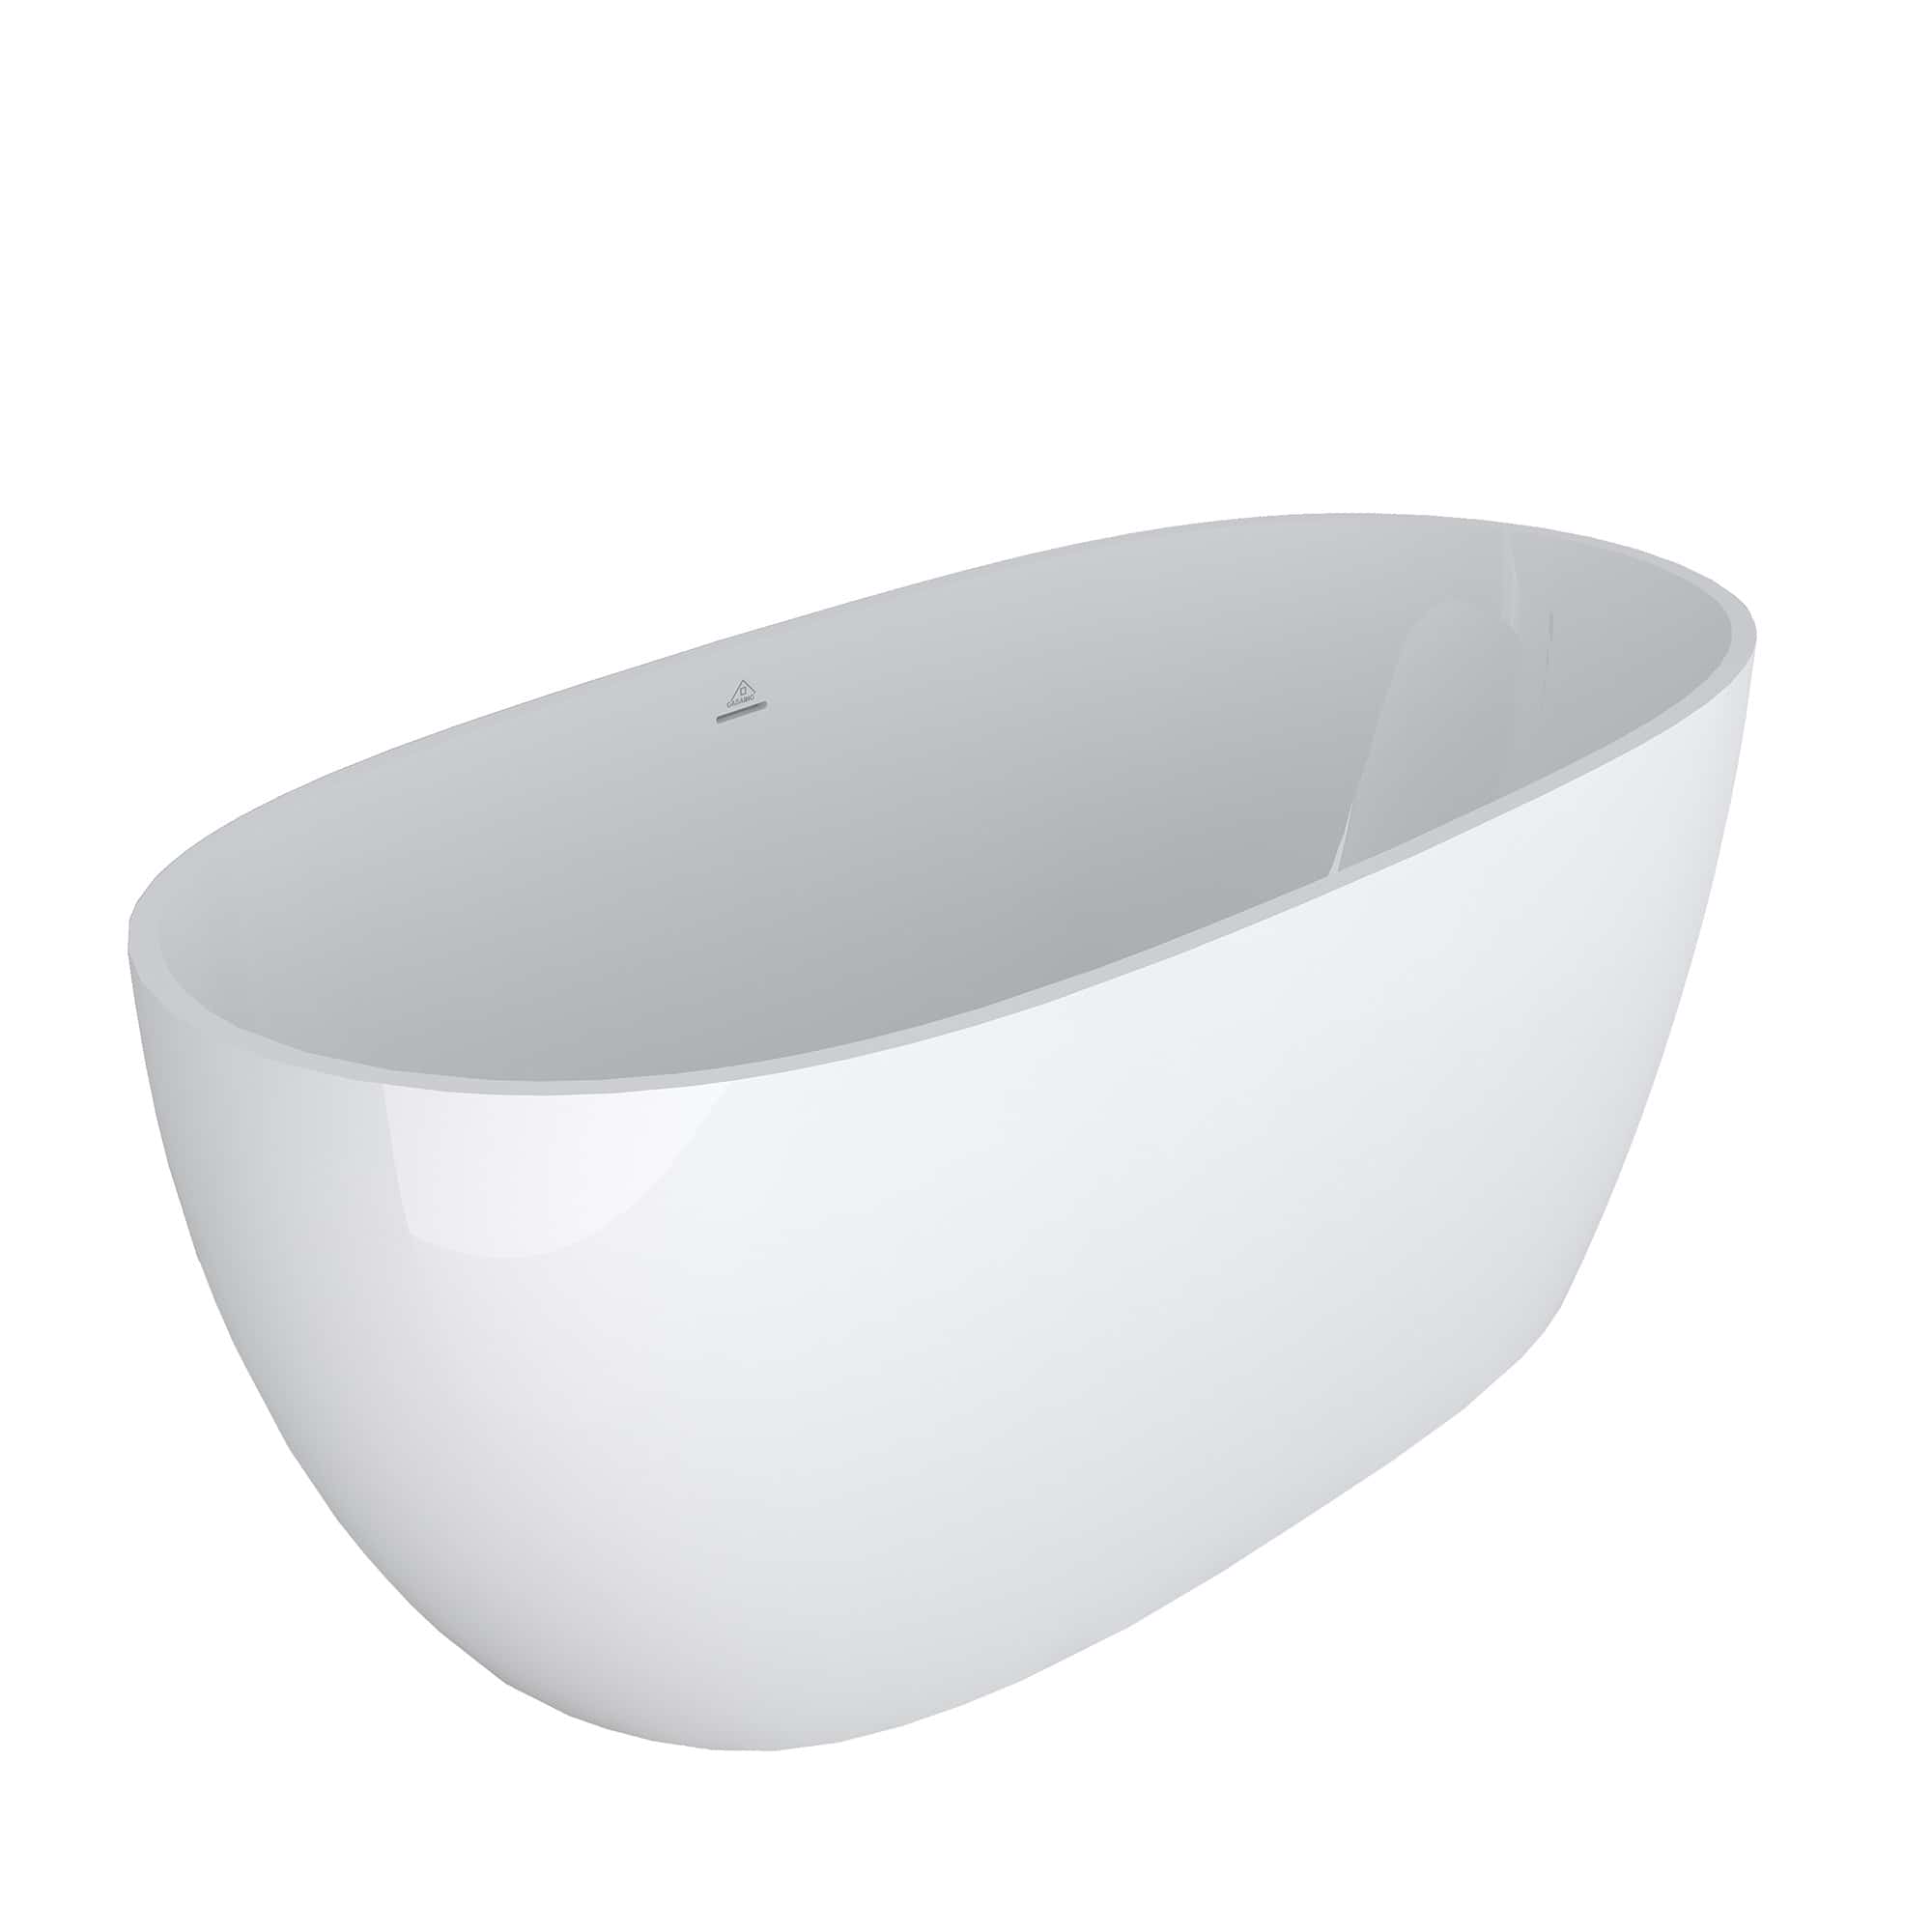 CASAINC 67 inch Glossy White Freestanding Solid Surface Oval Soaking T